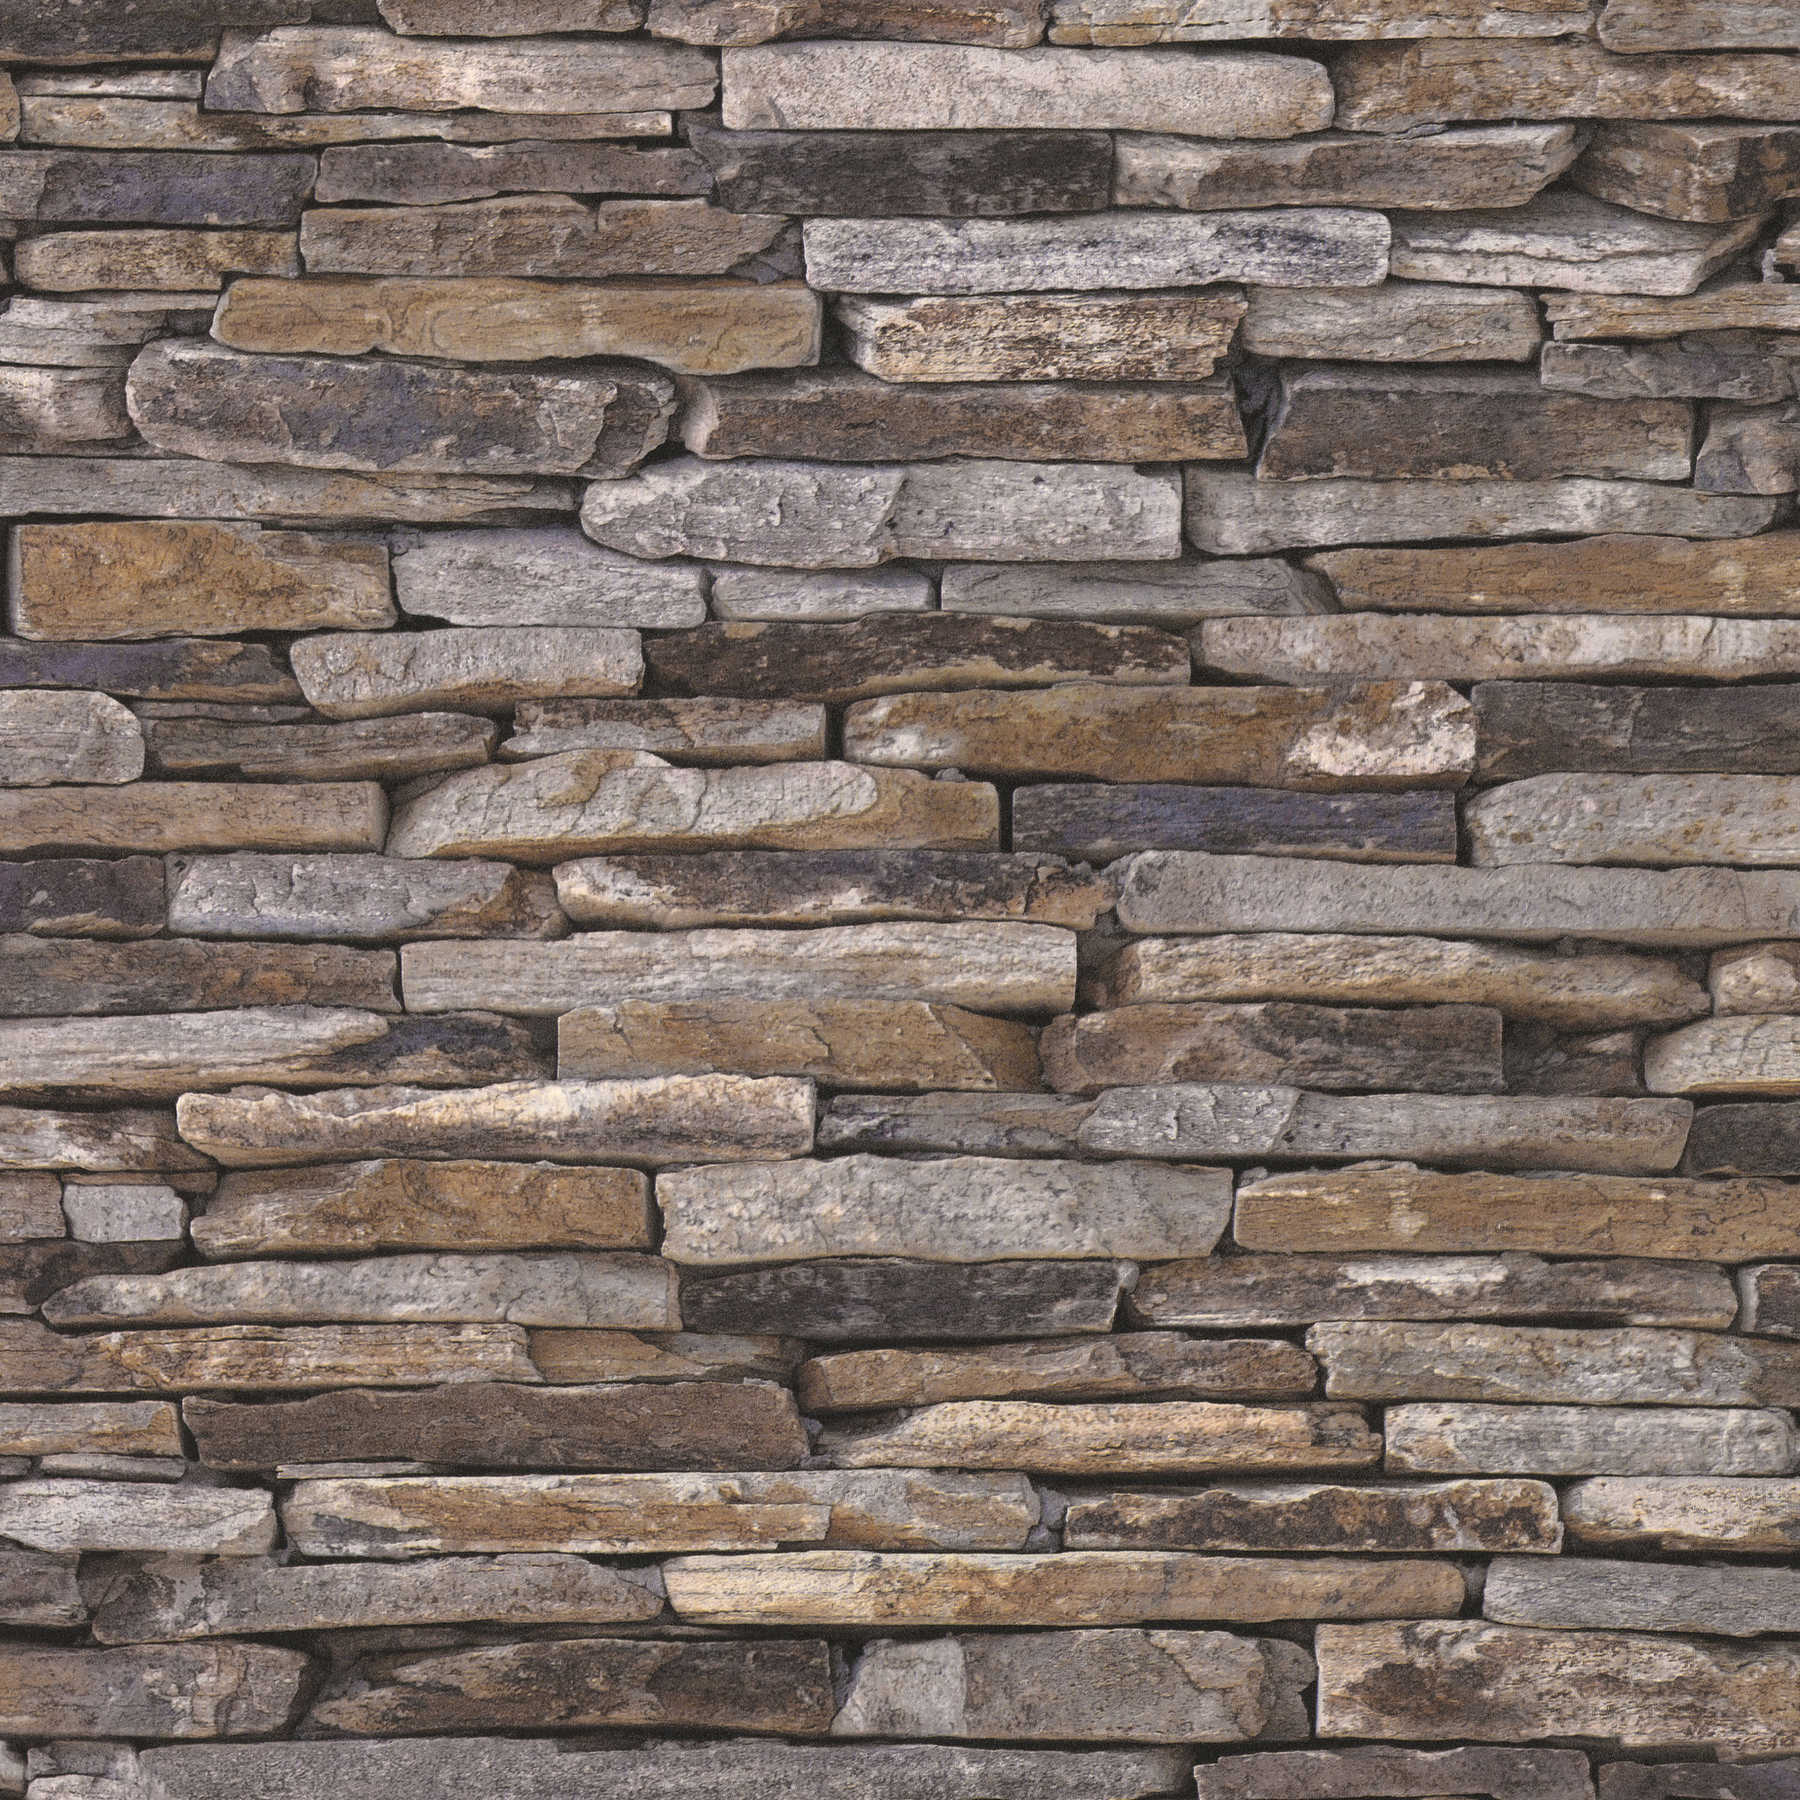             Masonry wallpaper with stone look & 3D motif - brown
        